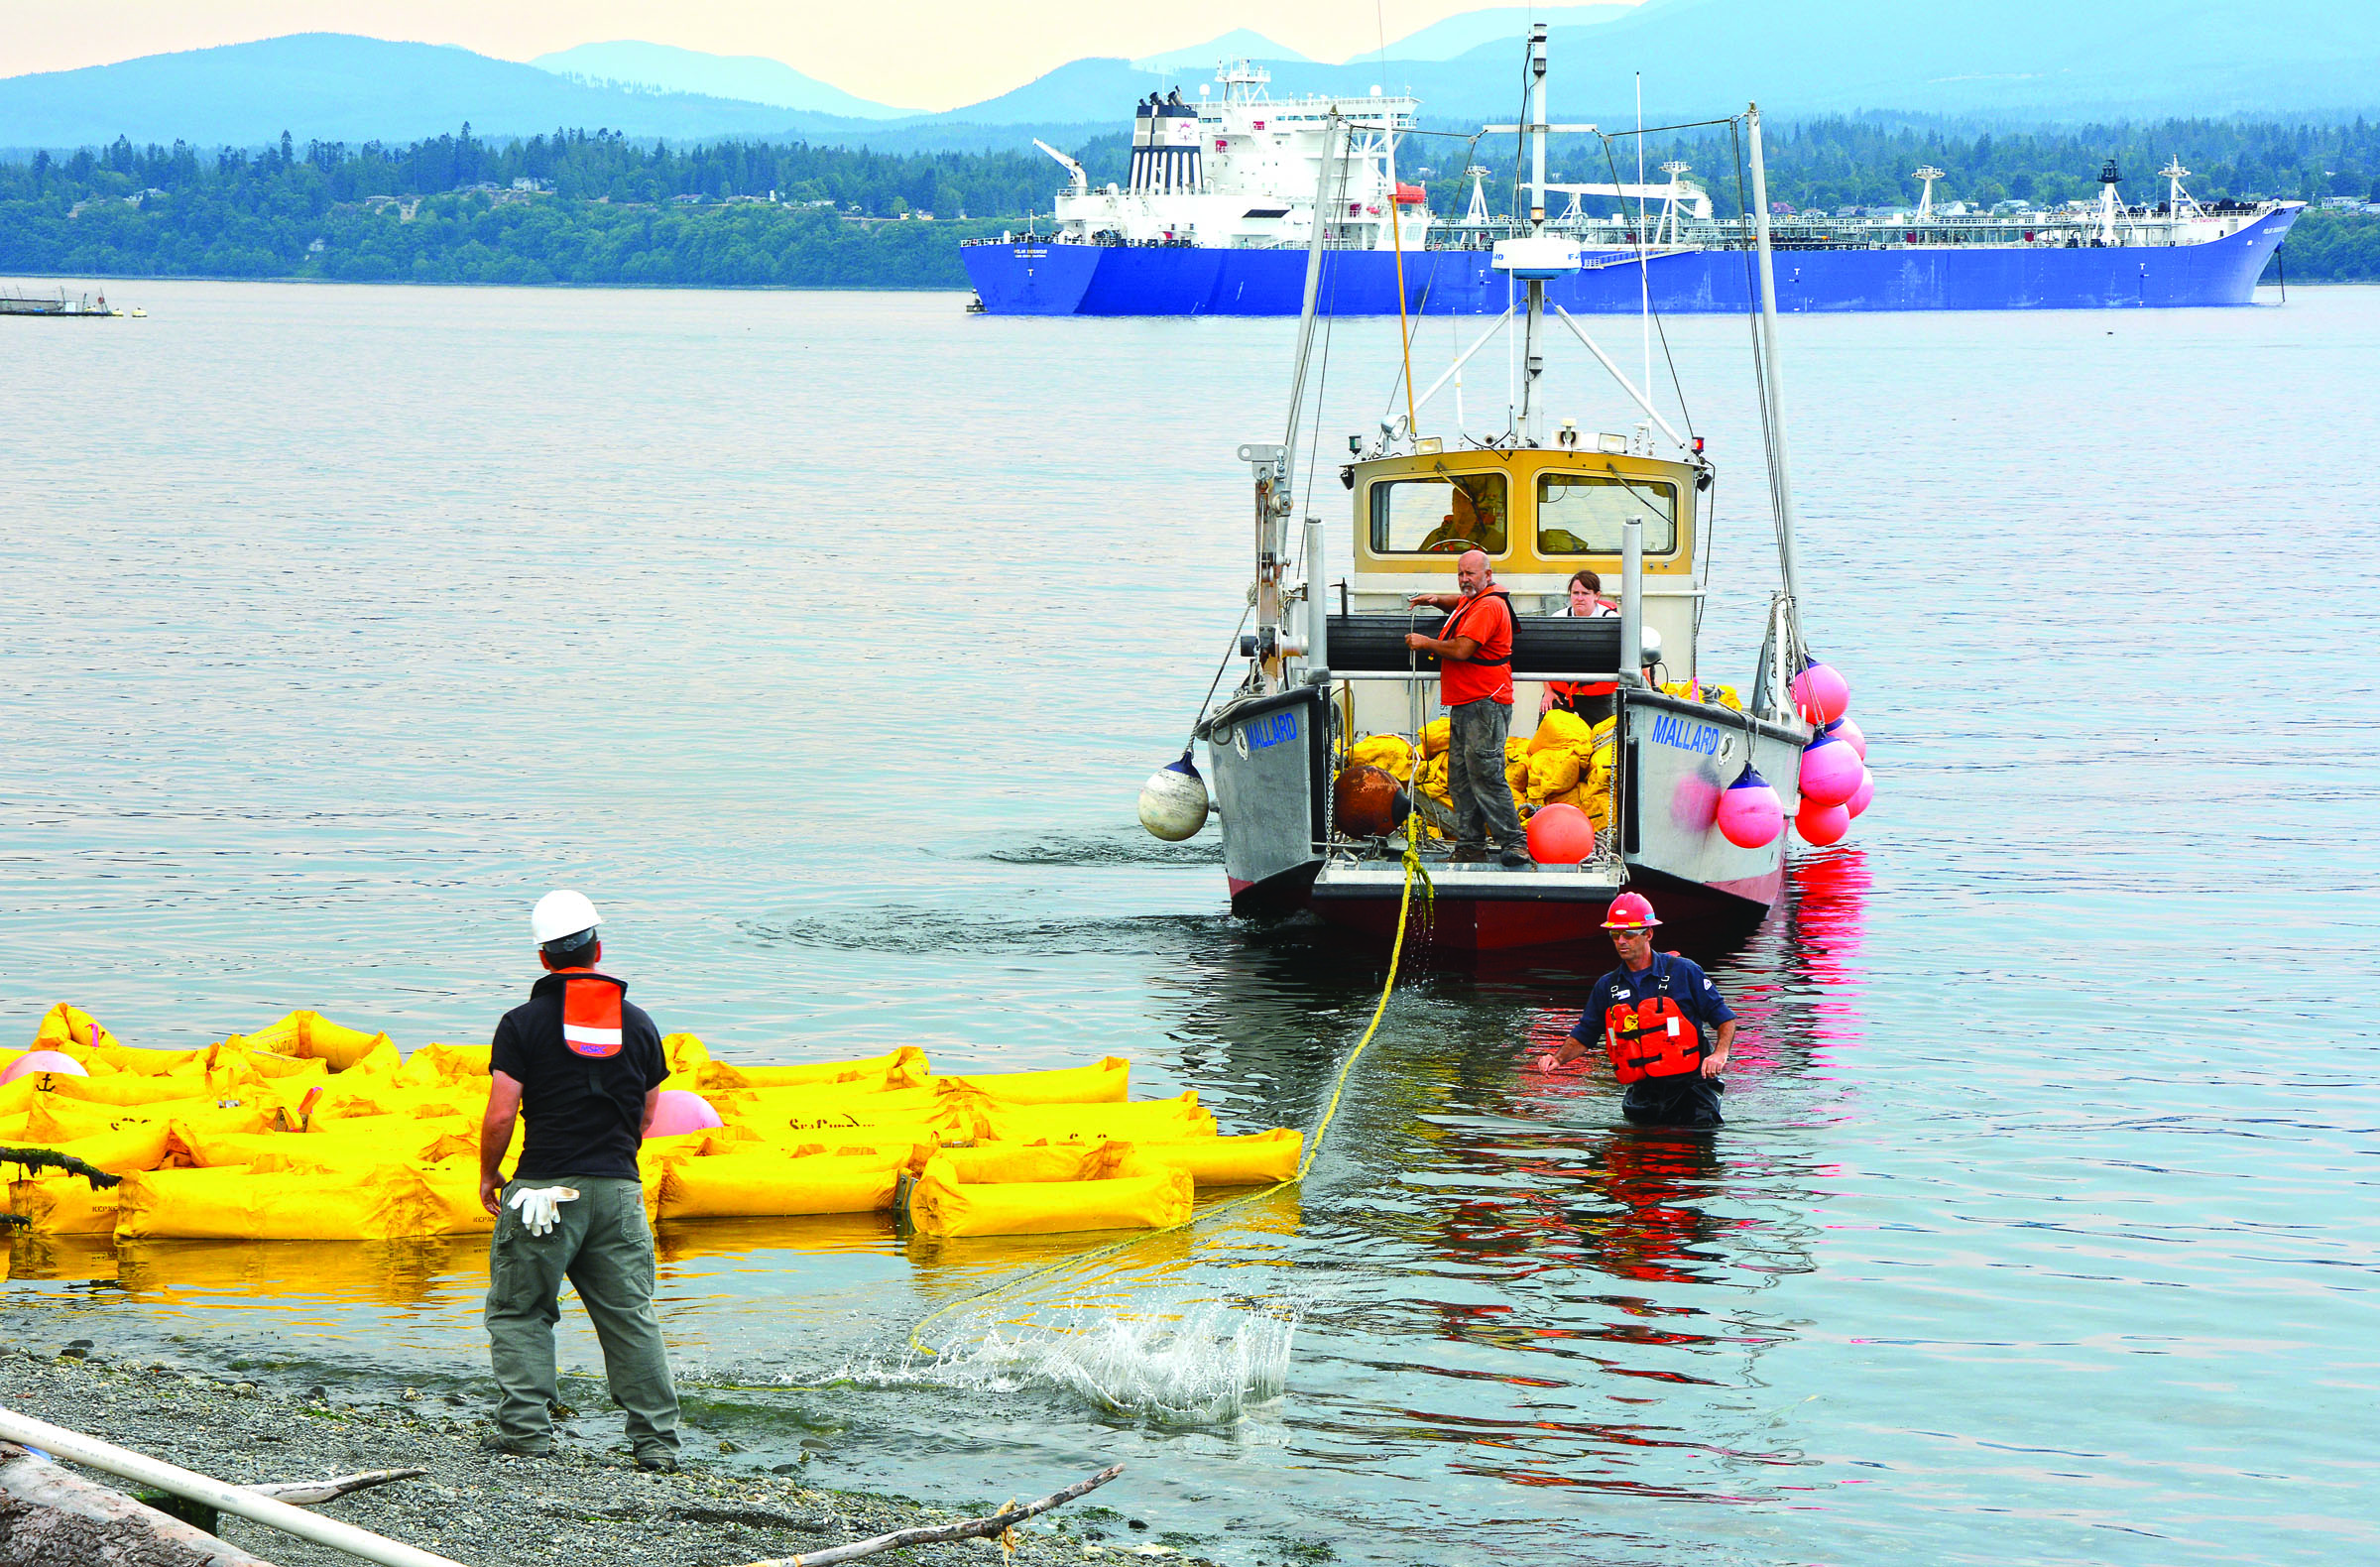 Participants work together Wednesday as part of the Pacific Northwest Oil Spill Control Course in Port Angeles Harbor. Jay Cline